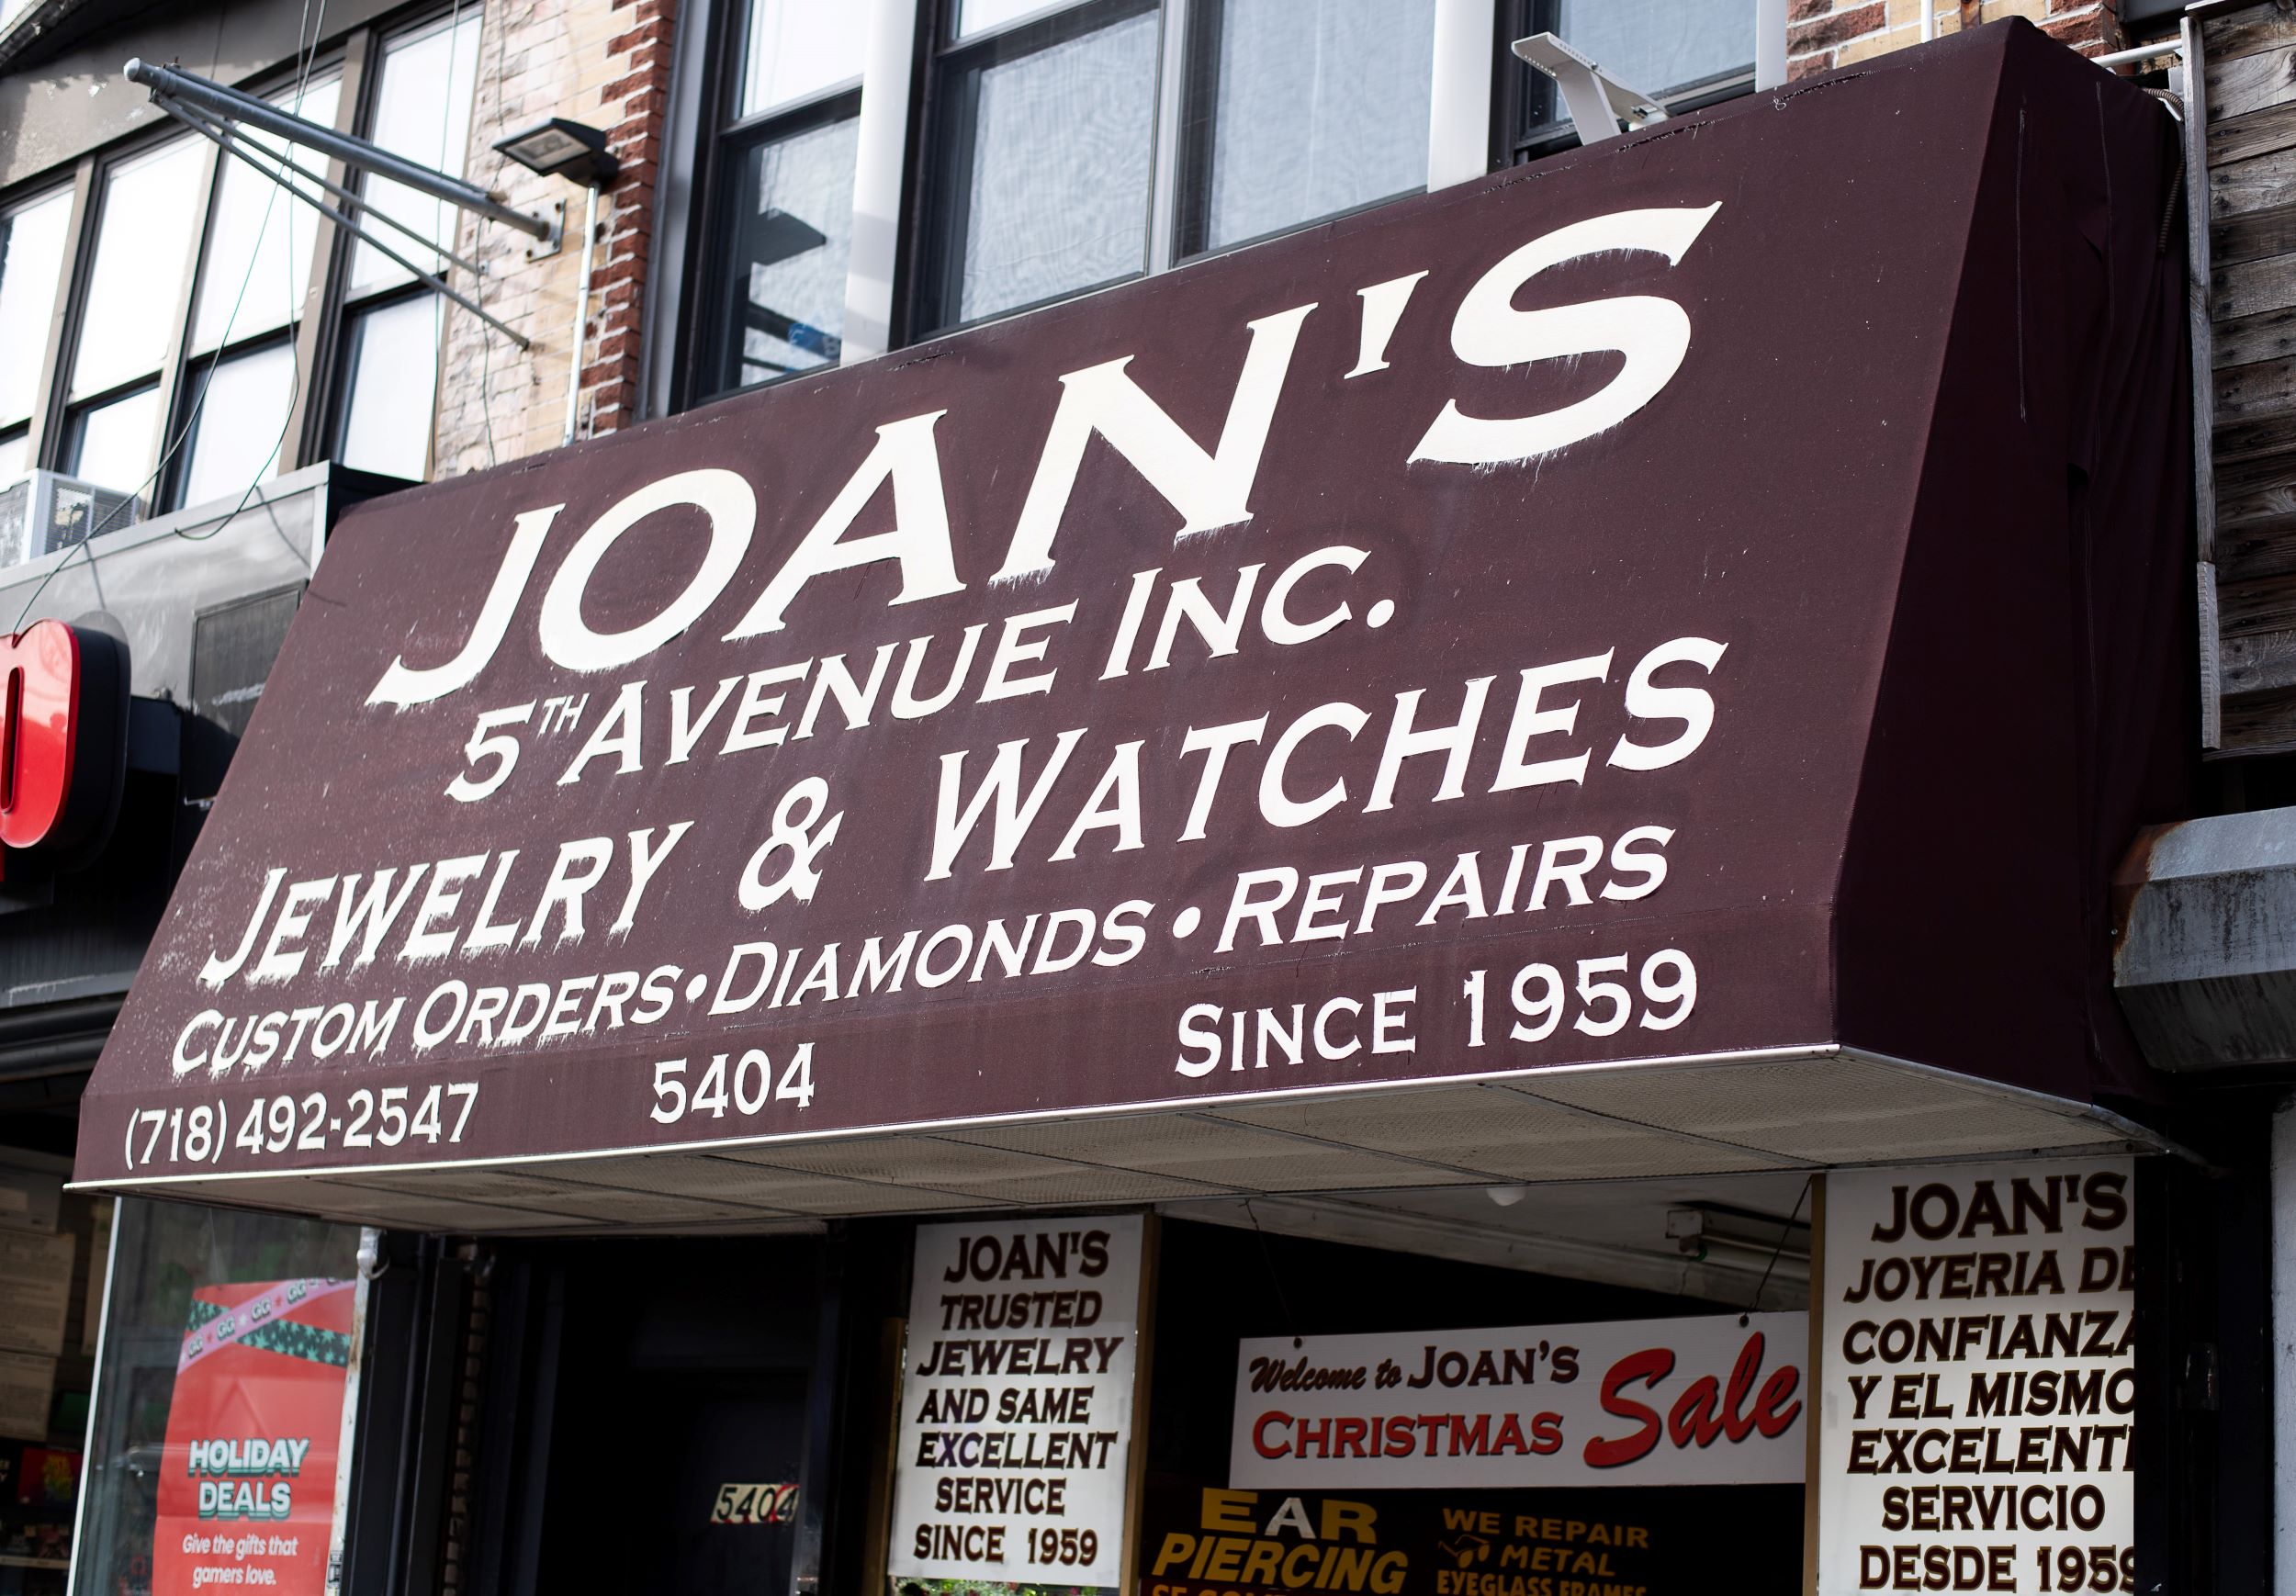 A weathered outdoor sign for "joan's 5th avenue inc., jewelry & watches" indicating services like custom orders, diamonds, and repairs, with the establishment date "since 1959." a faded sale banner is visible beneath.